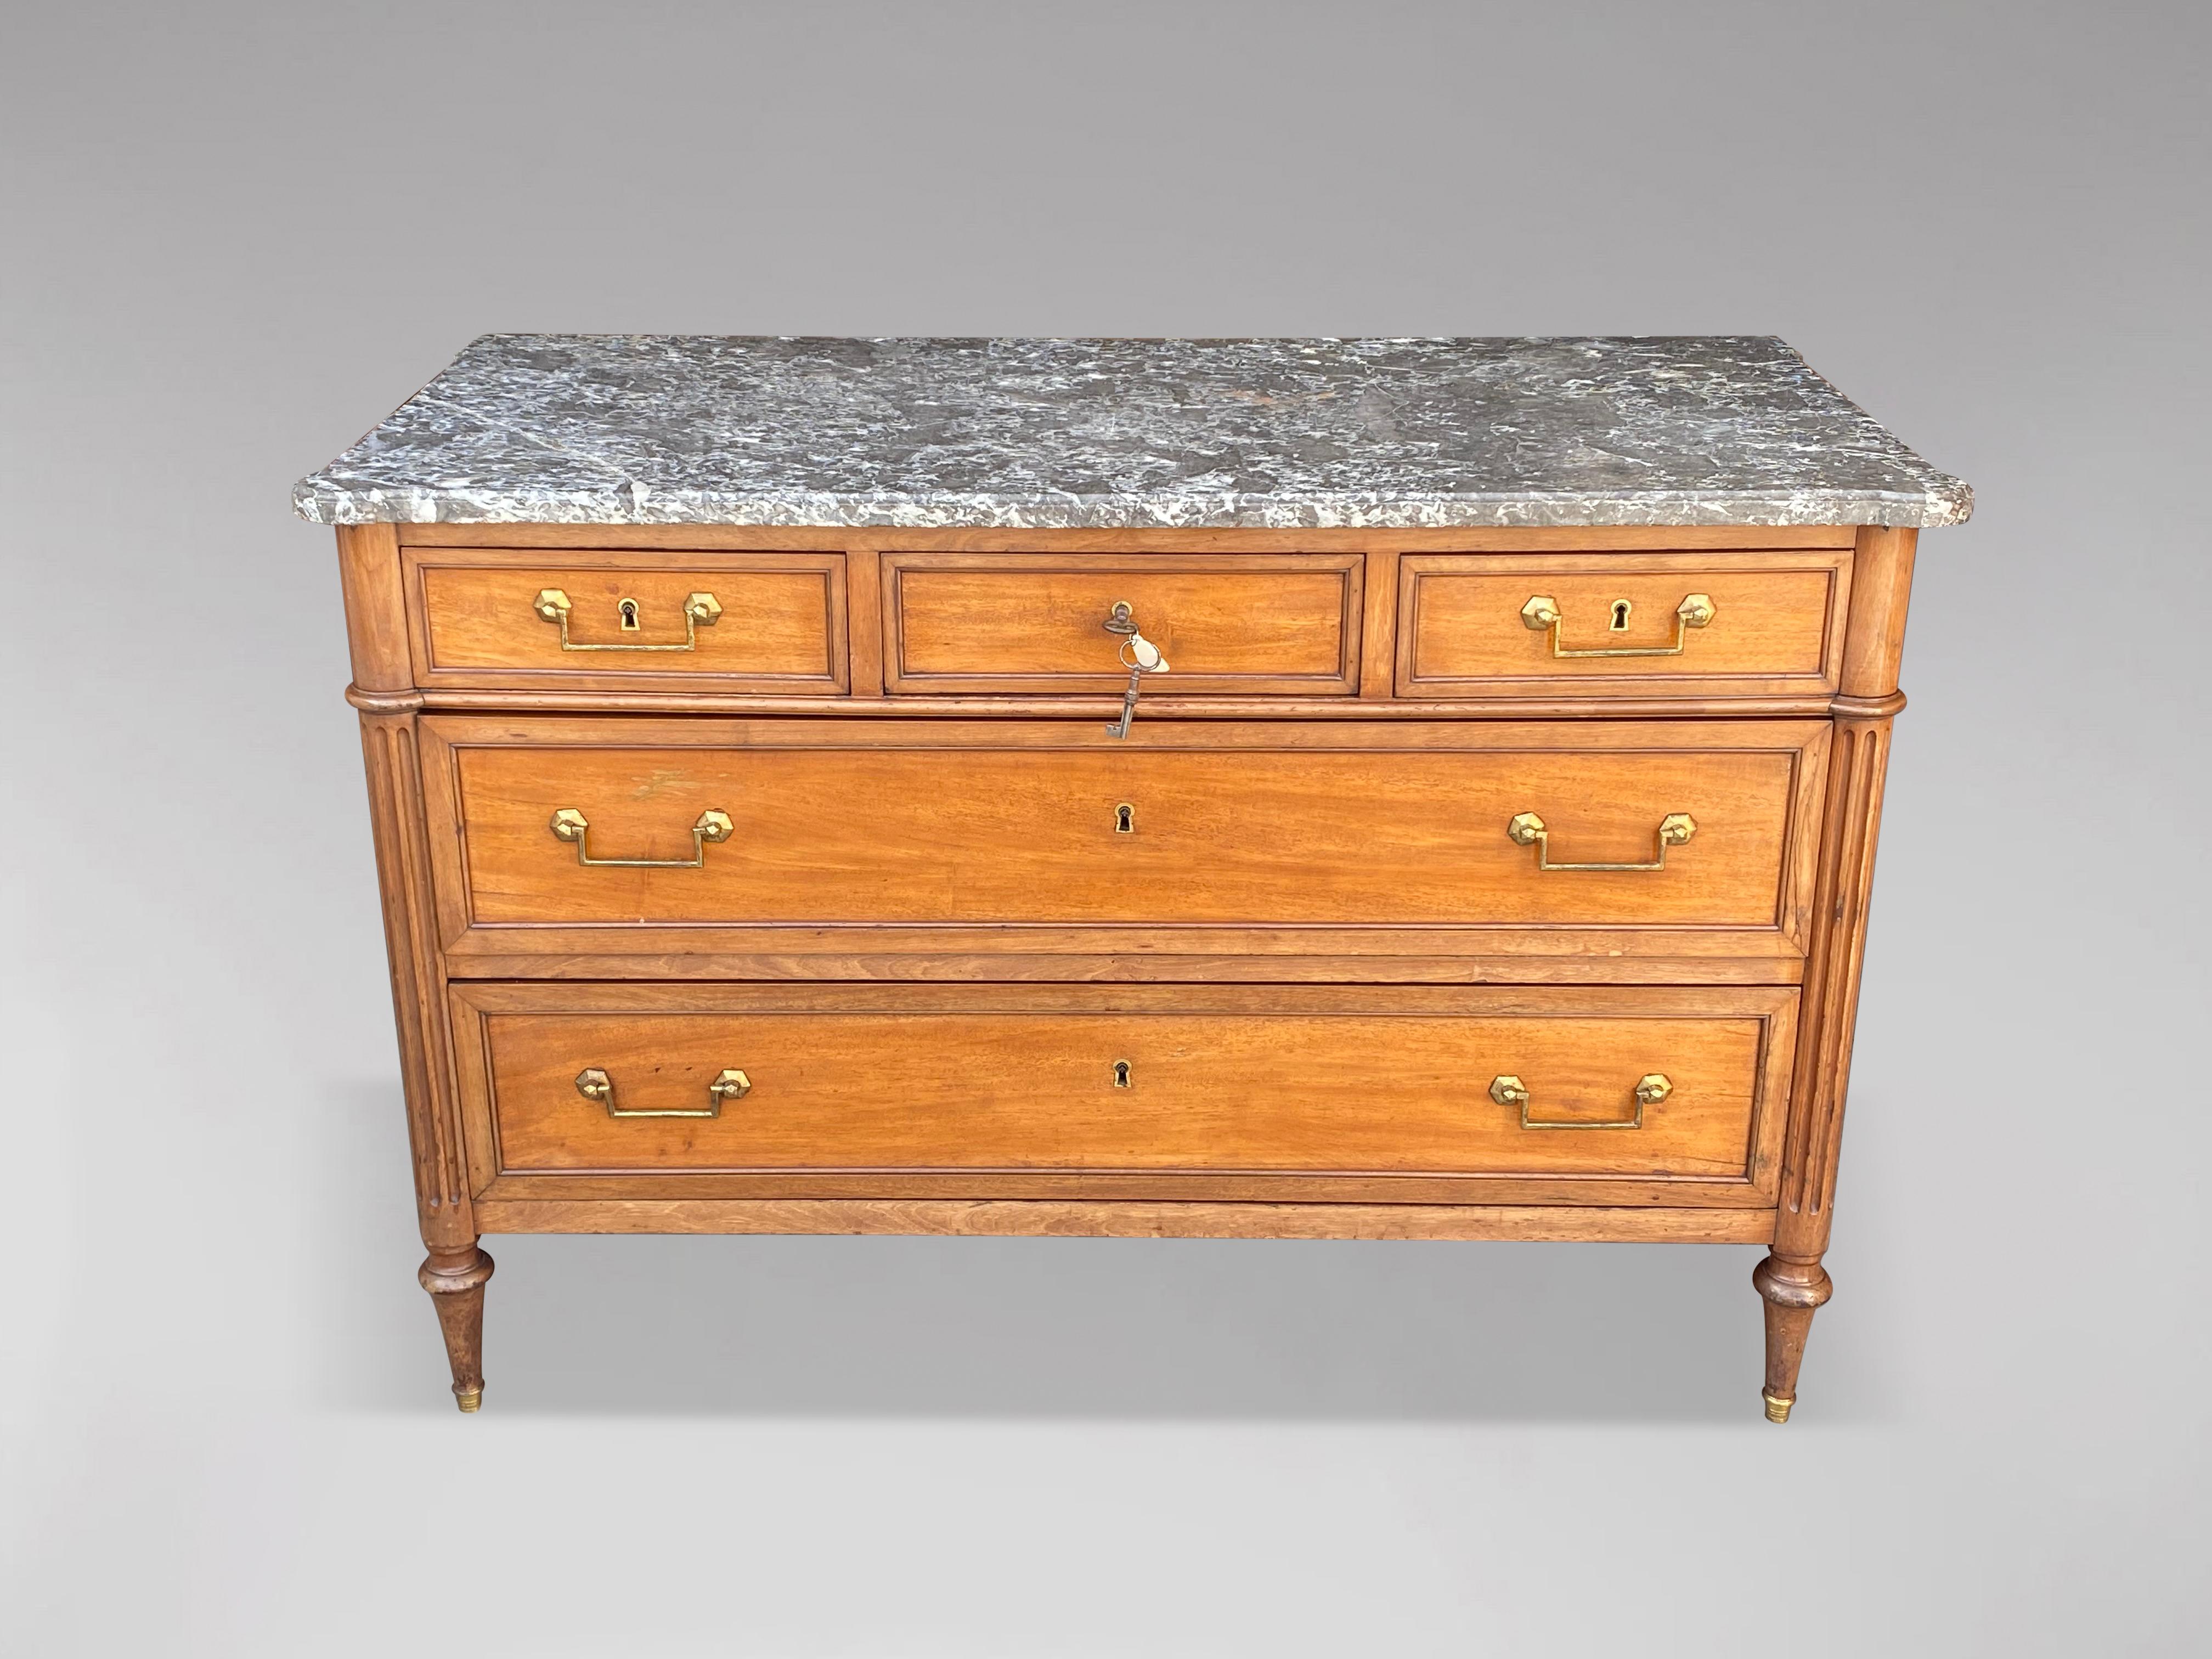 18th Century French Louis XVI Walnut & Marble Commode In Good Condition In Petworth,West Sussex, GB